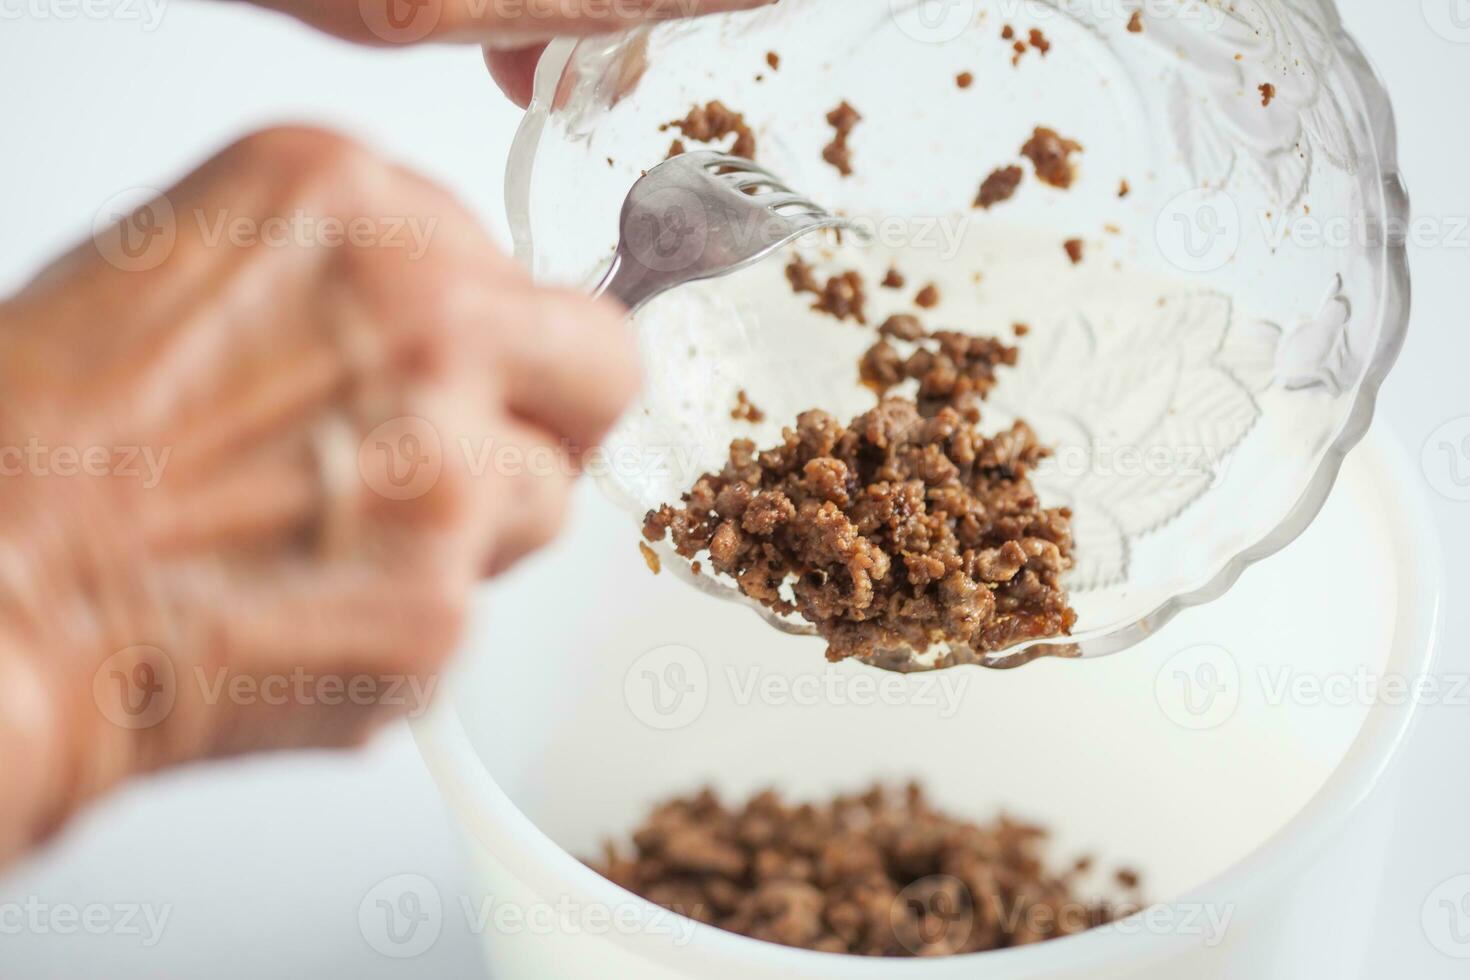 Step by step Levantine cuisine kibbeh preparation. Mixing the ingredients to prepare kibbeh filling into a bowl photo